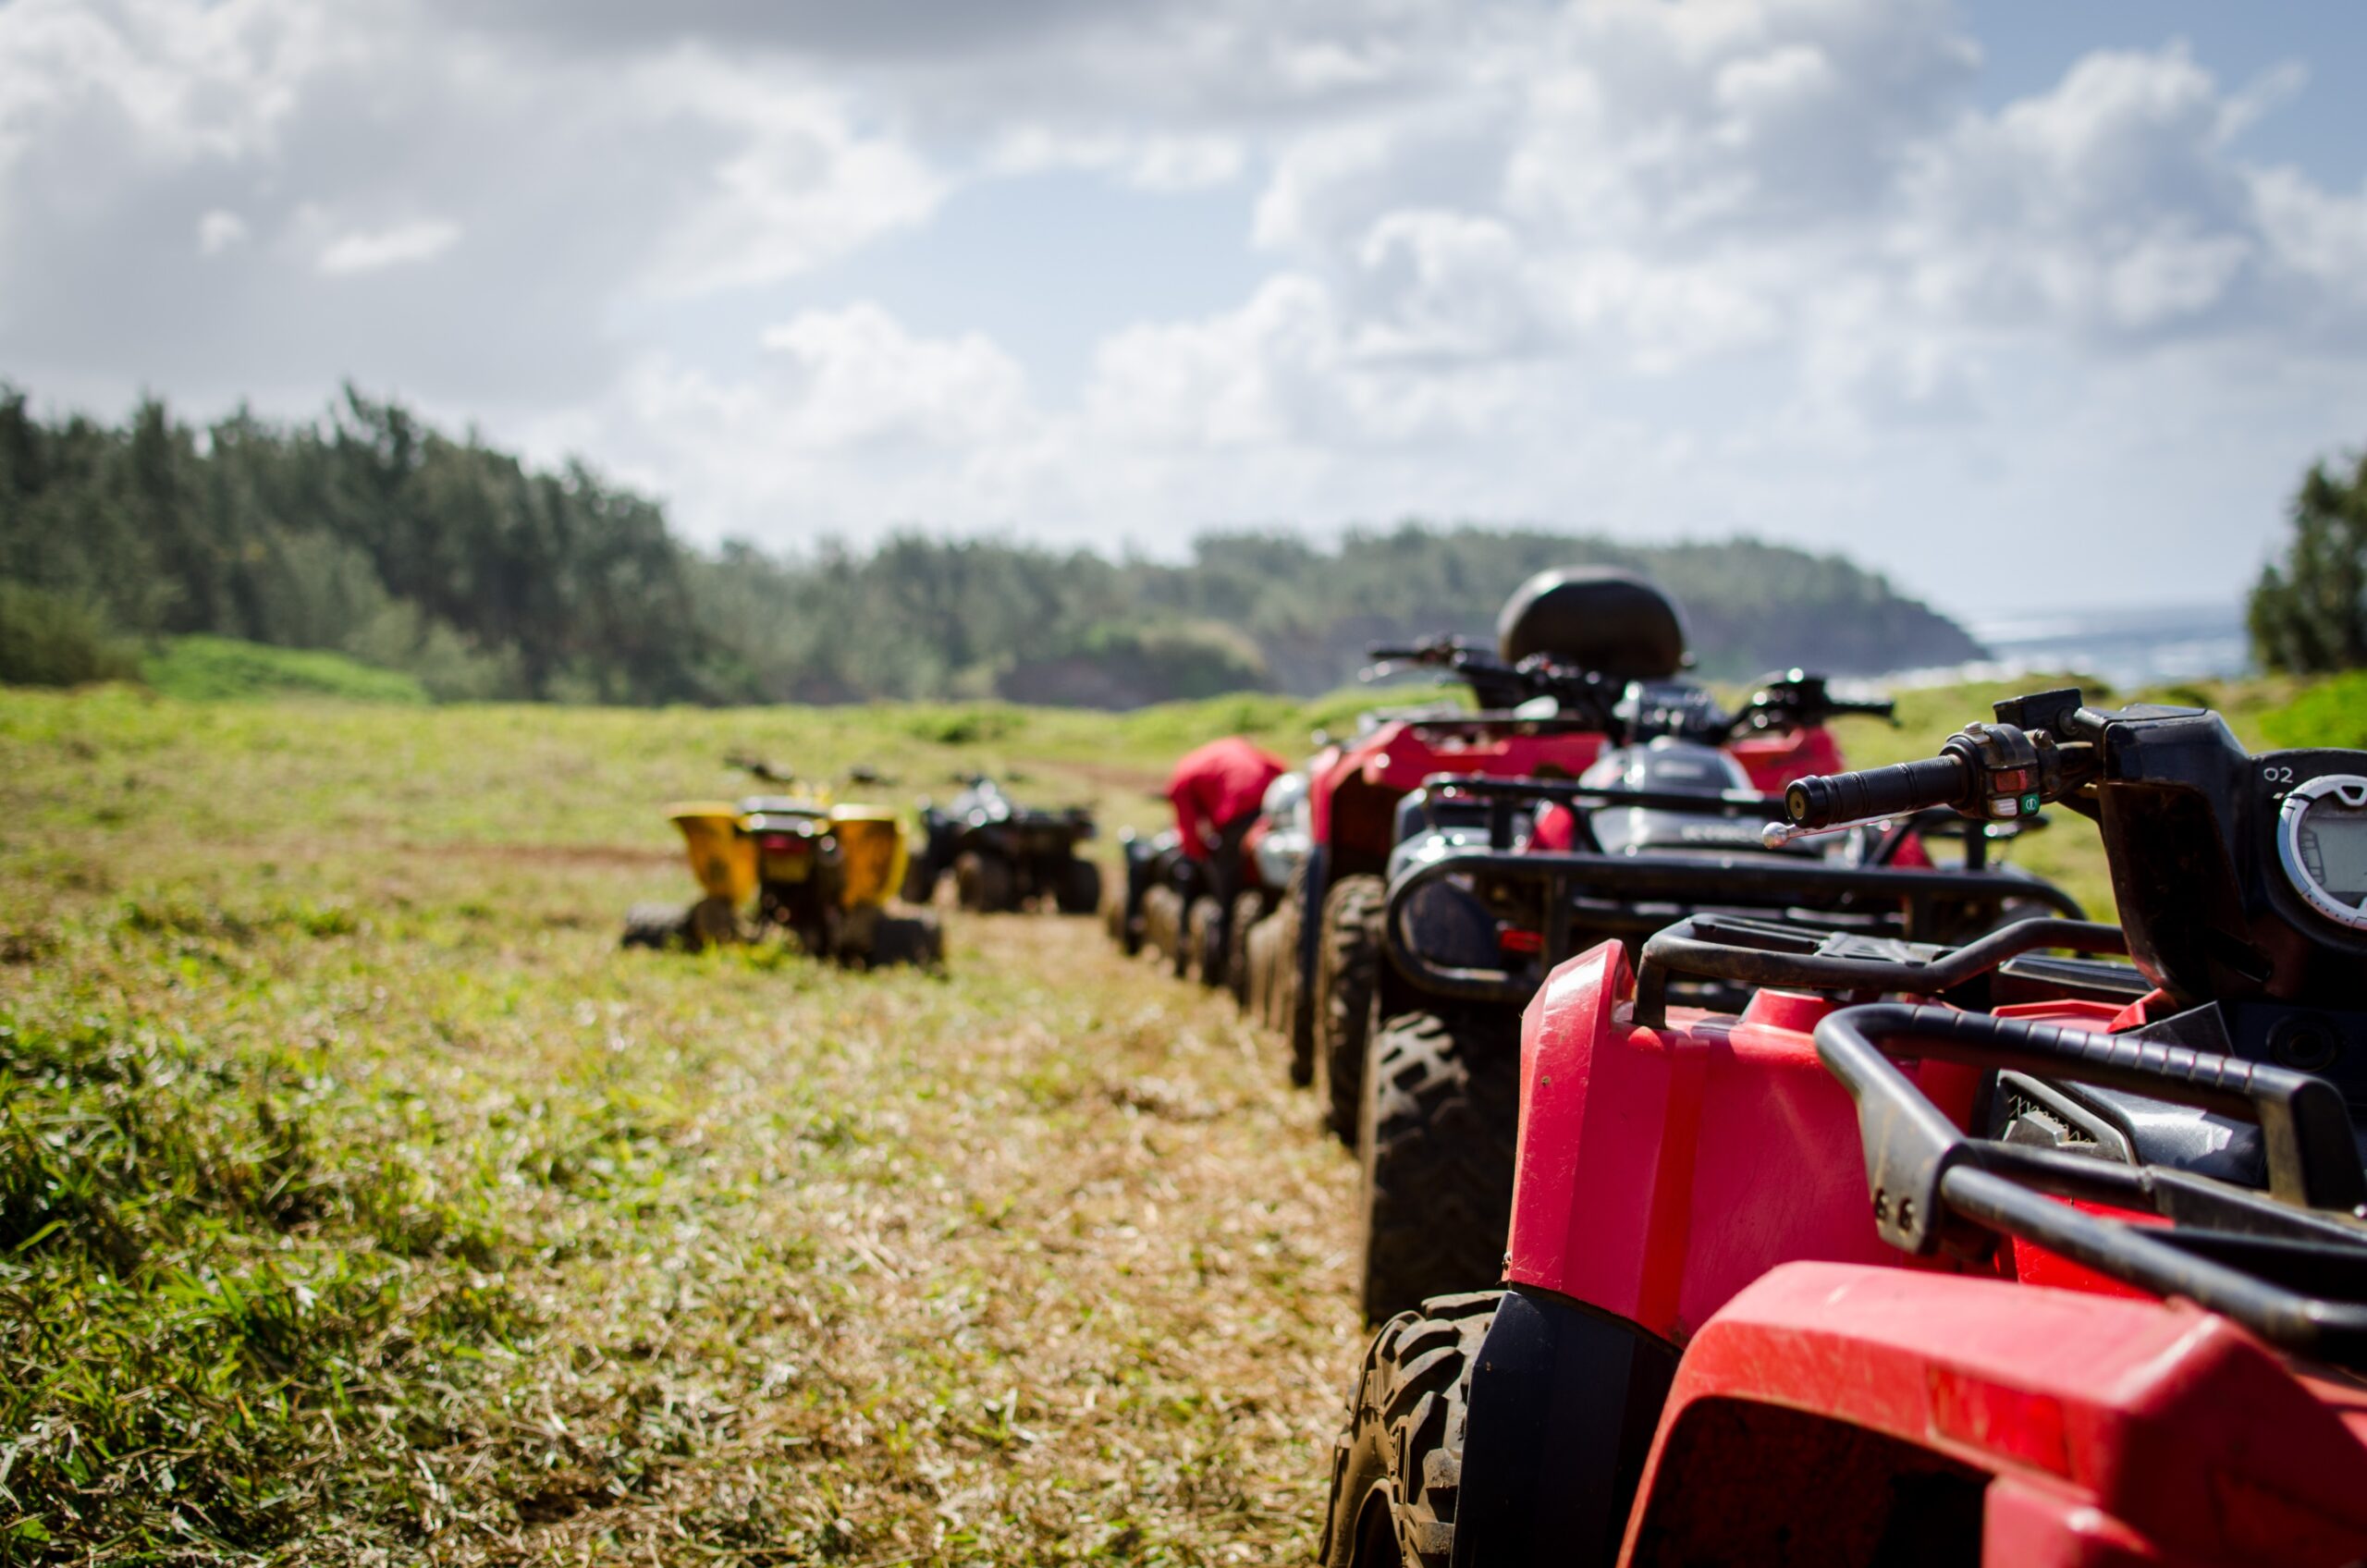 This is a picture of a series of Polaris Ranger ATVs lined up outside in the woods.